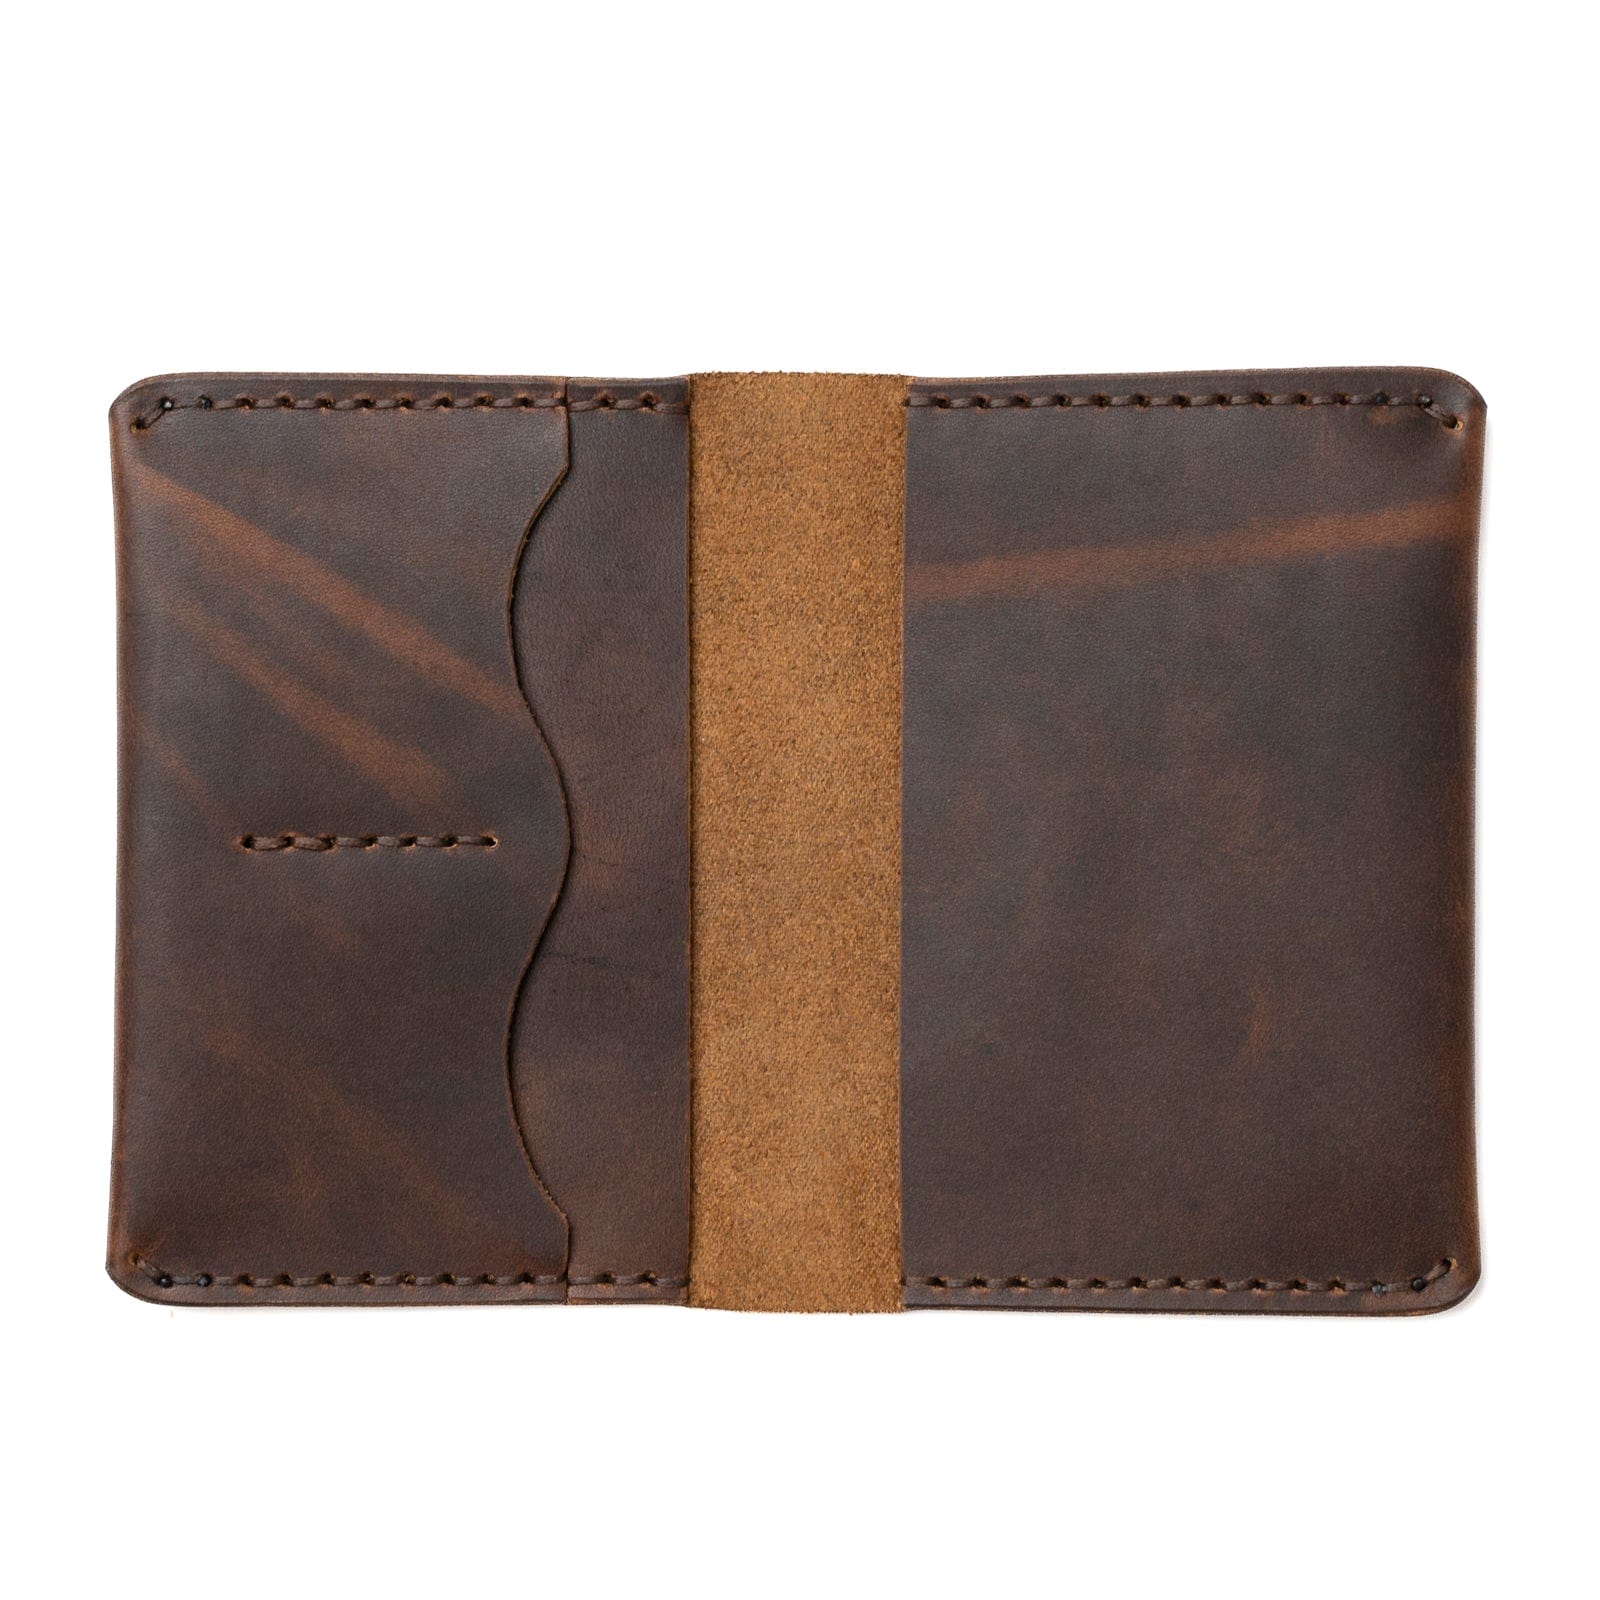 Leather Passport Cover - Heritage Brown